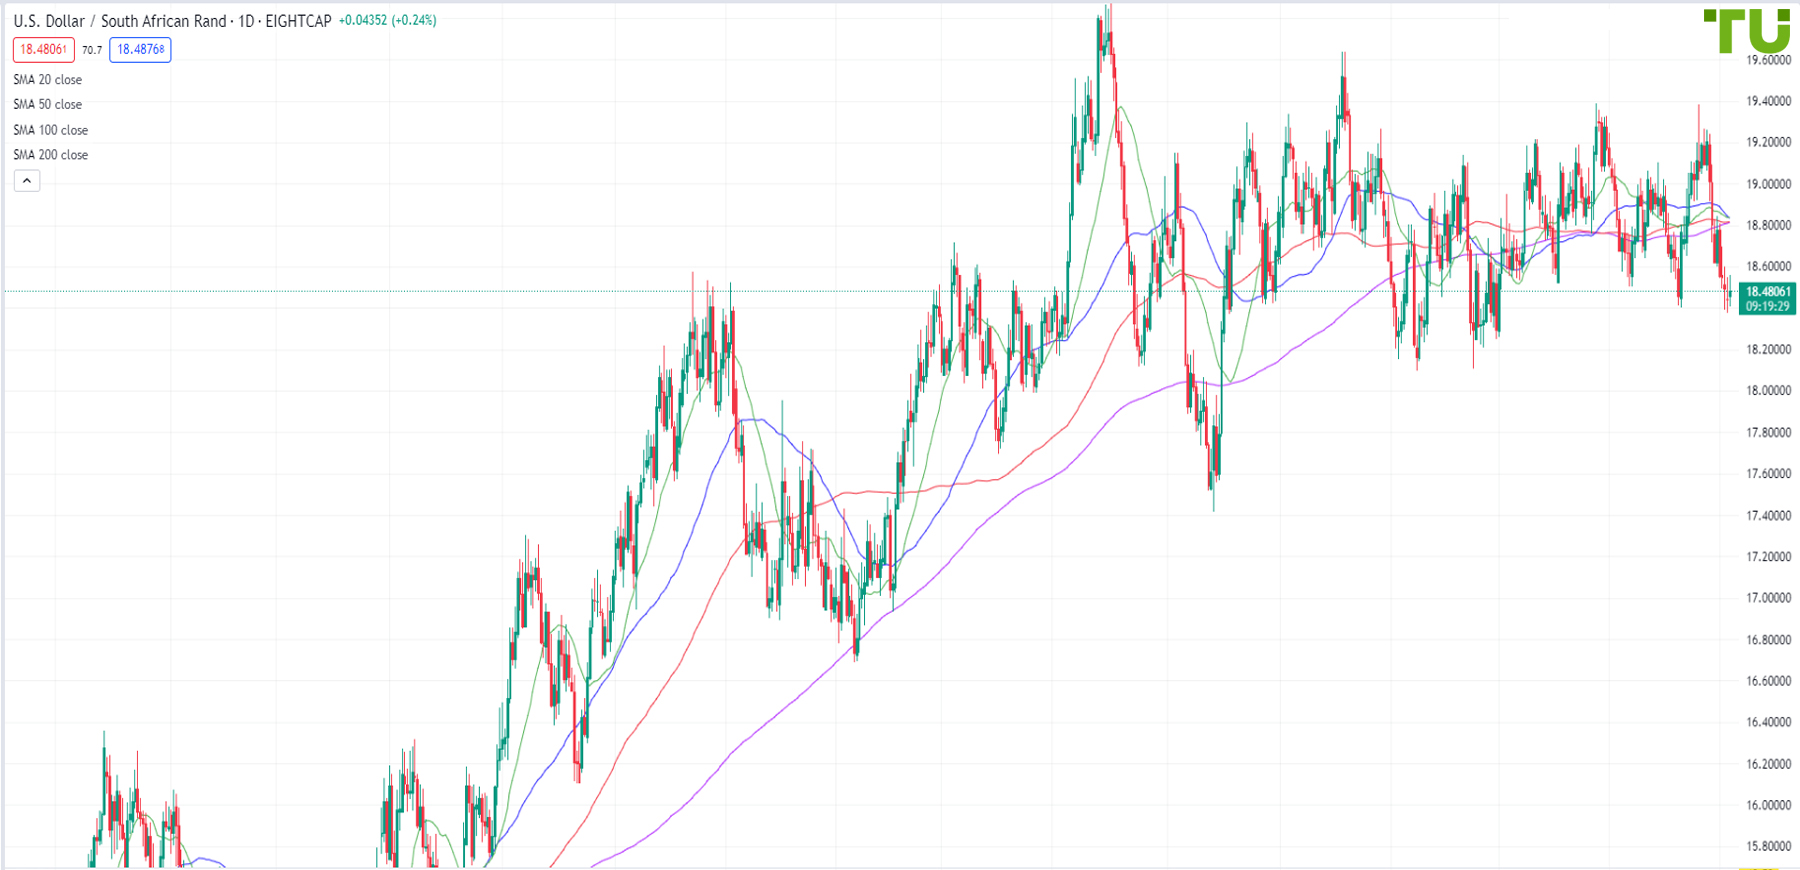 USD/ZAR trying to establish above current lows